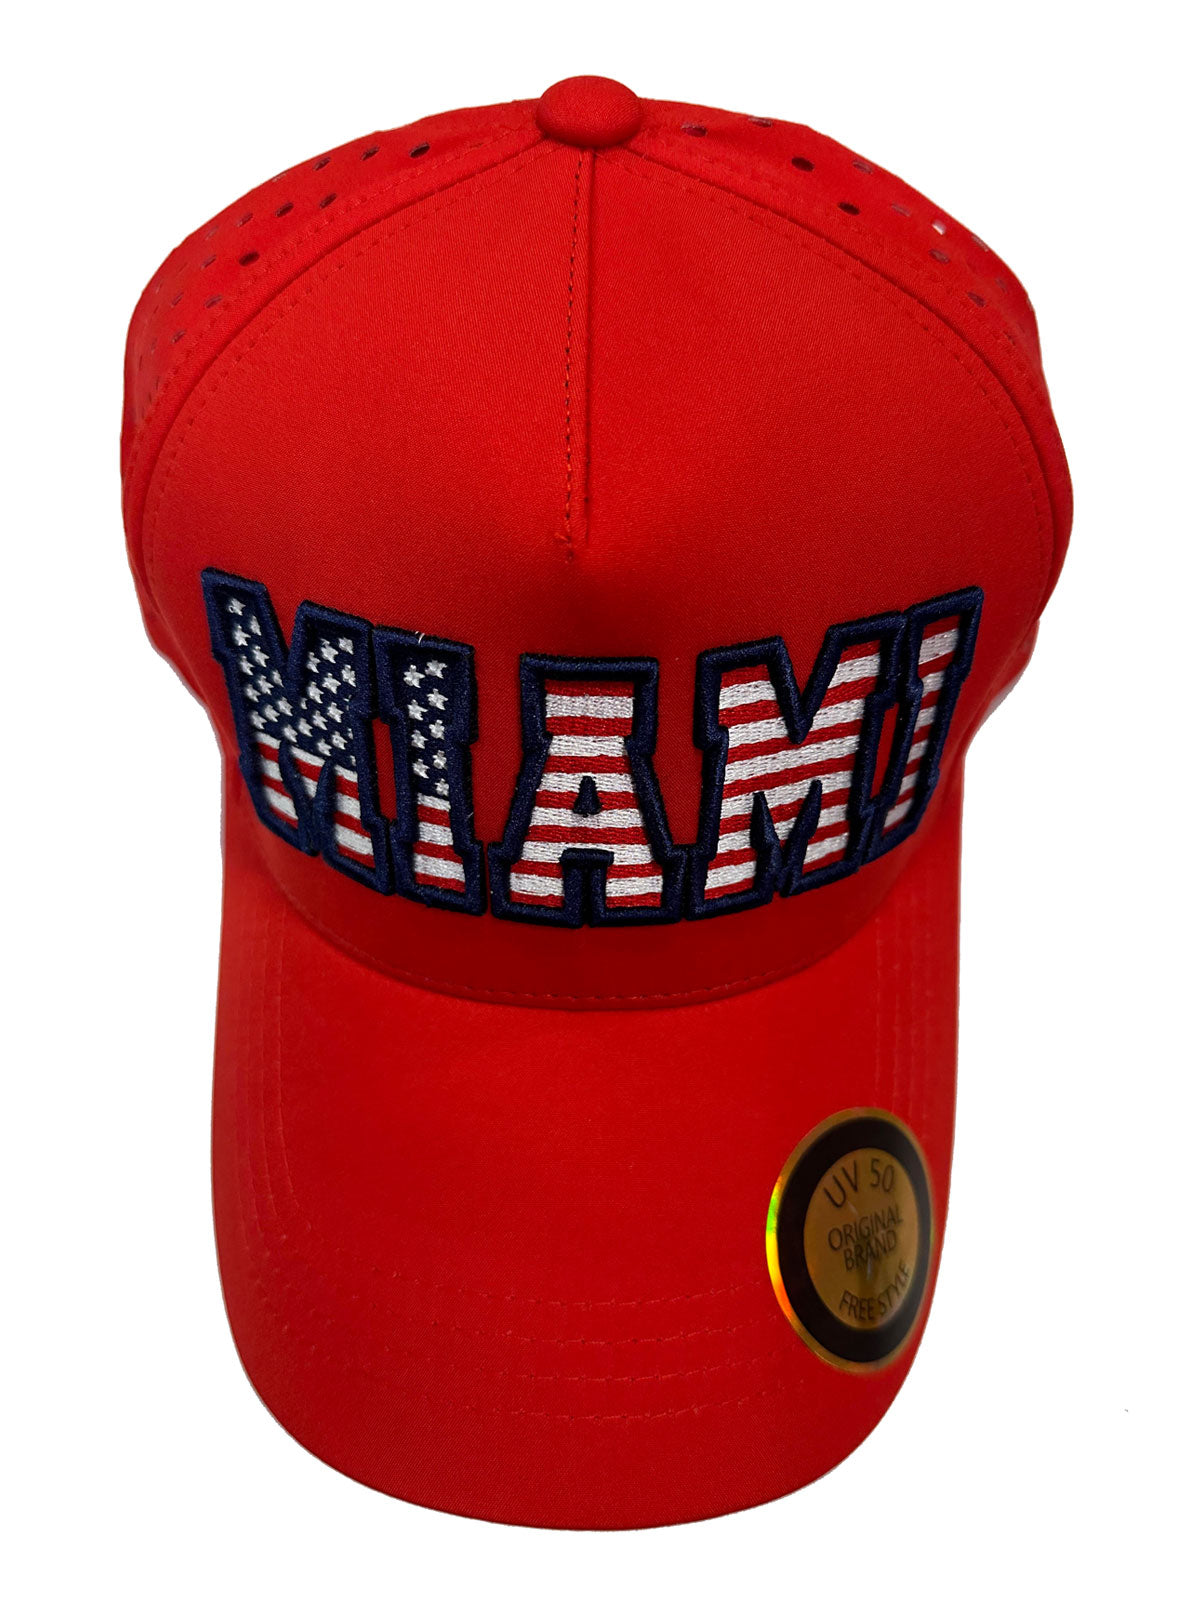 Miami Breathable Mesh Polyester Hats Assortment, adult Size UV 50 - One Size Fits Most, Dad or Mom Gift Baseball Cap Red